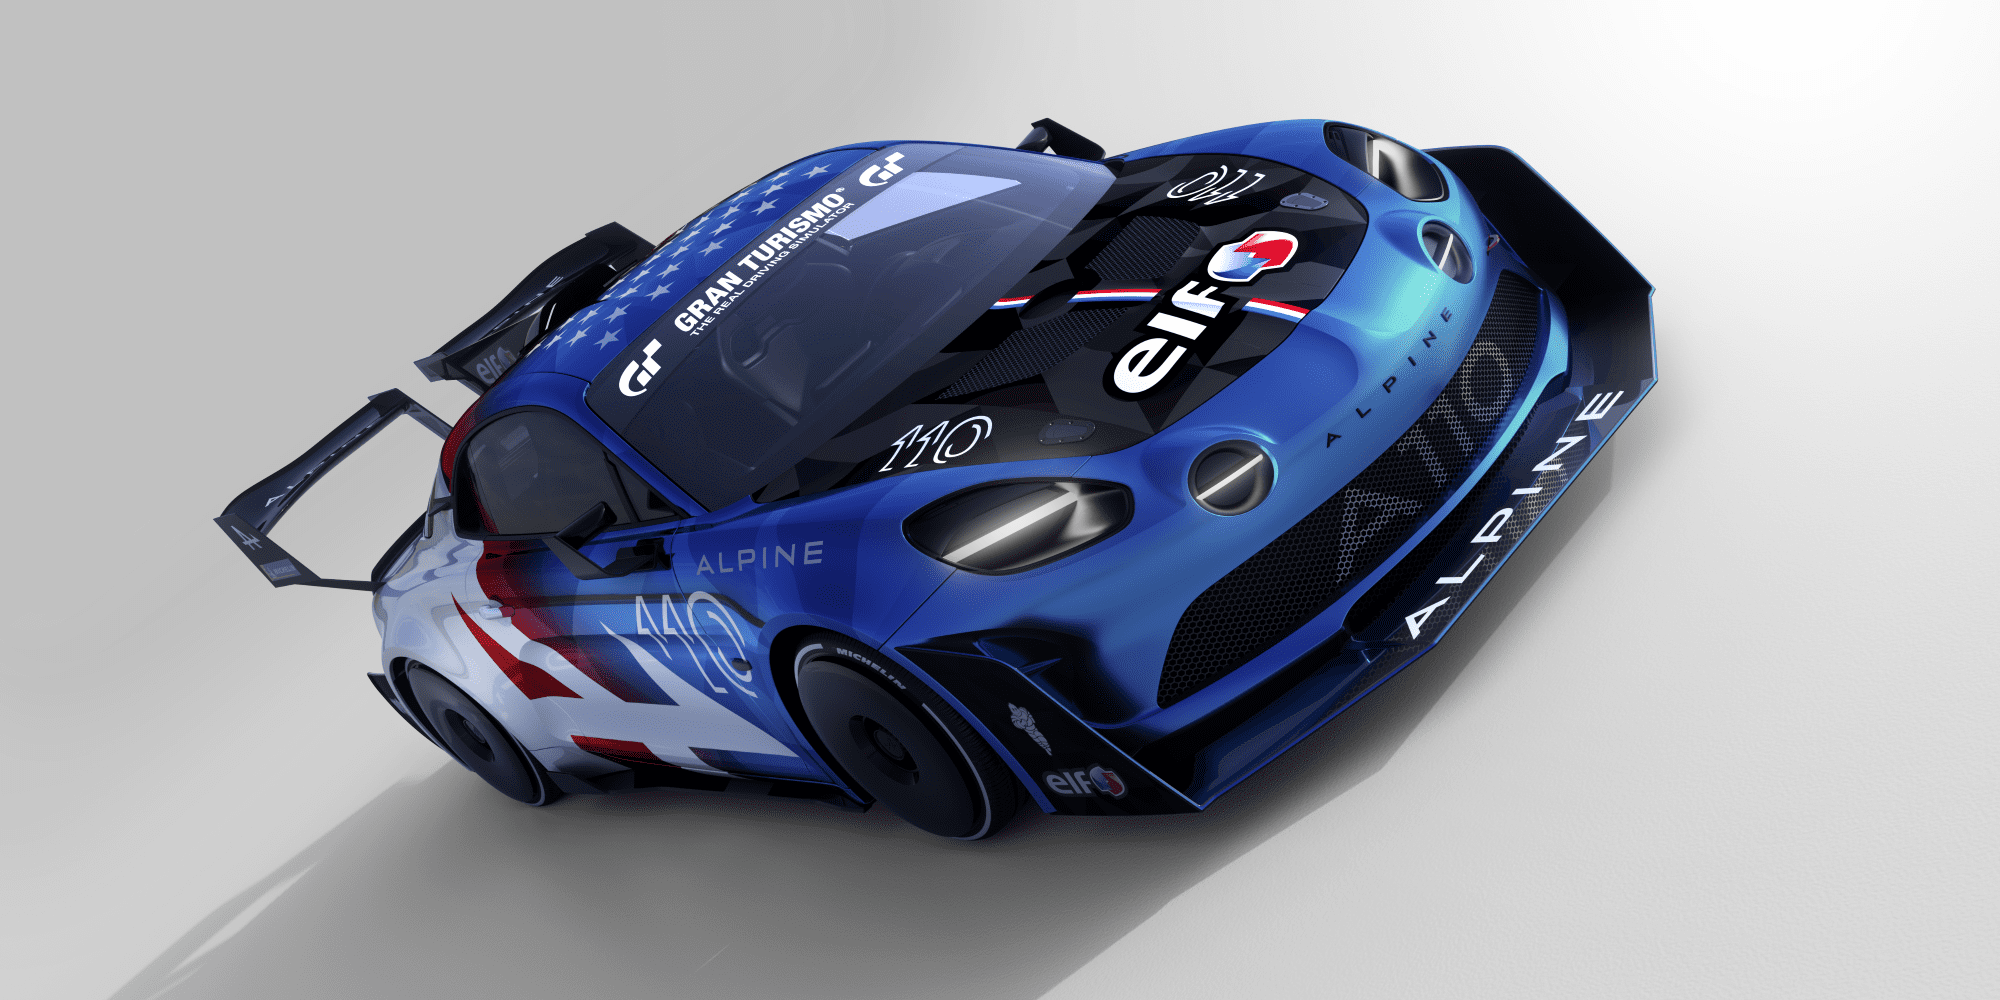 A shot of the Alpine A110 that will tackle the Pikes Peak climb